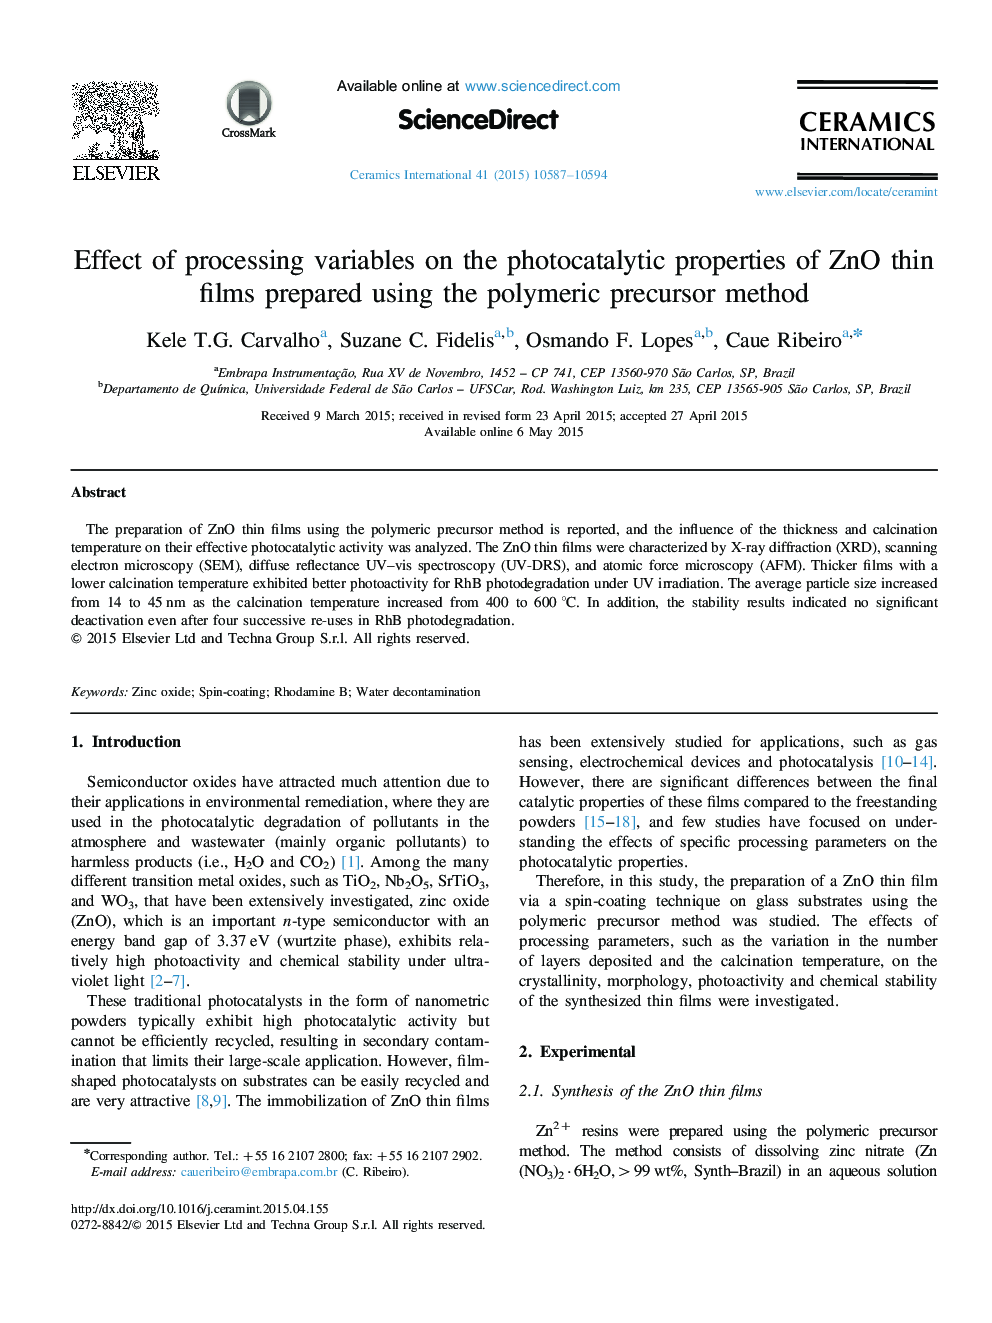 Effect of processing variables on the photocatalytic properties of ZnO thin films prepared using the polymeric precursor method